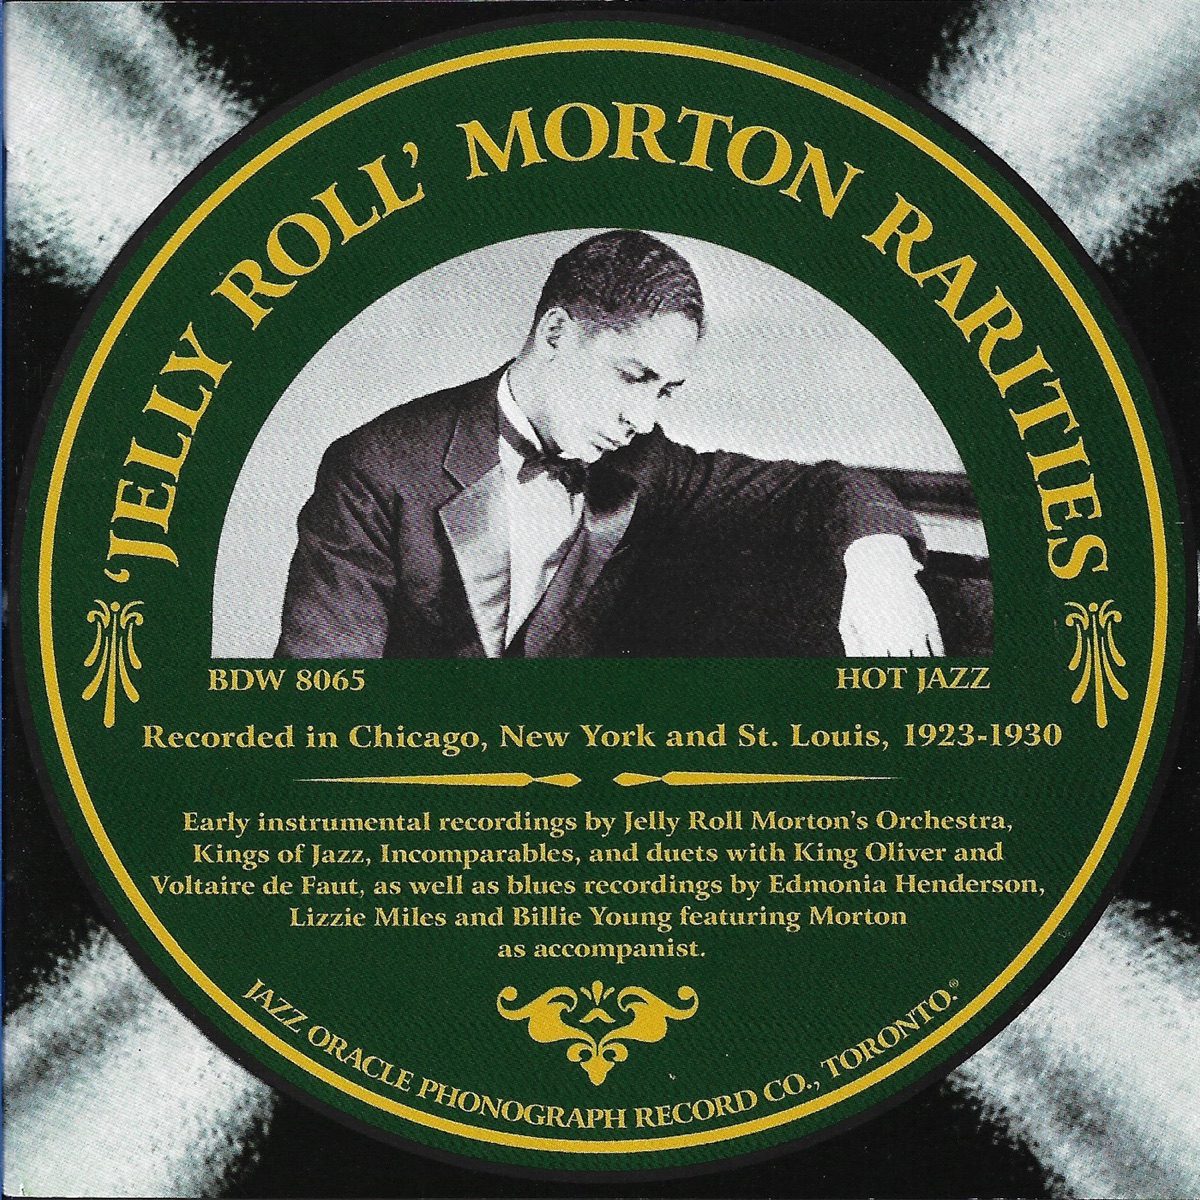 99 Hits : Jelly Roll Morton by Jelly Roll Morton on Apple Music